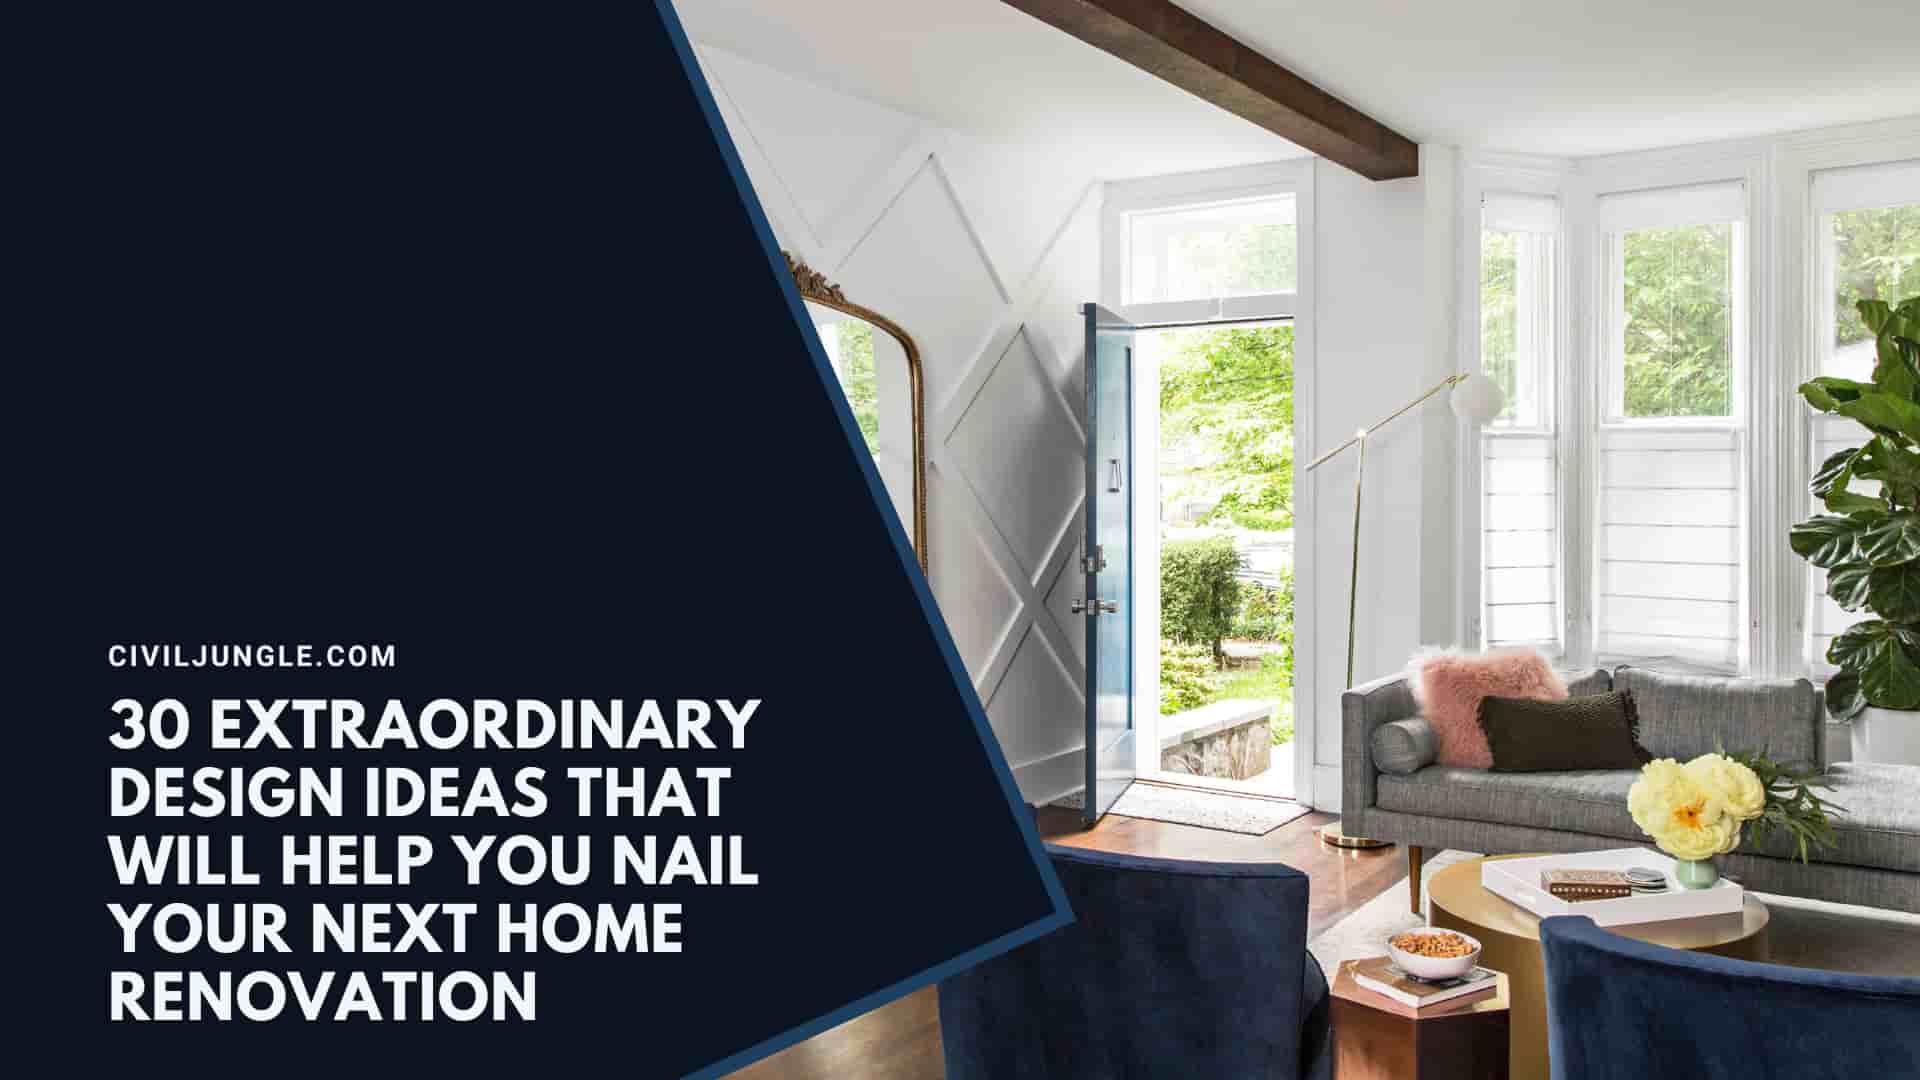 30 Extraordinary Design Ideas That Will Help You Nail Your Next Home Renovation